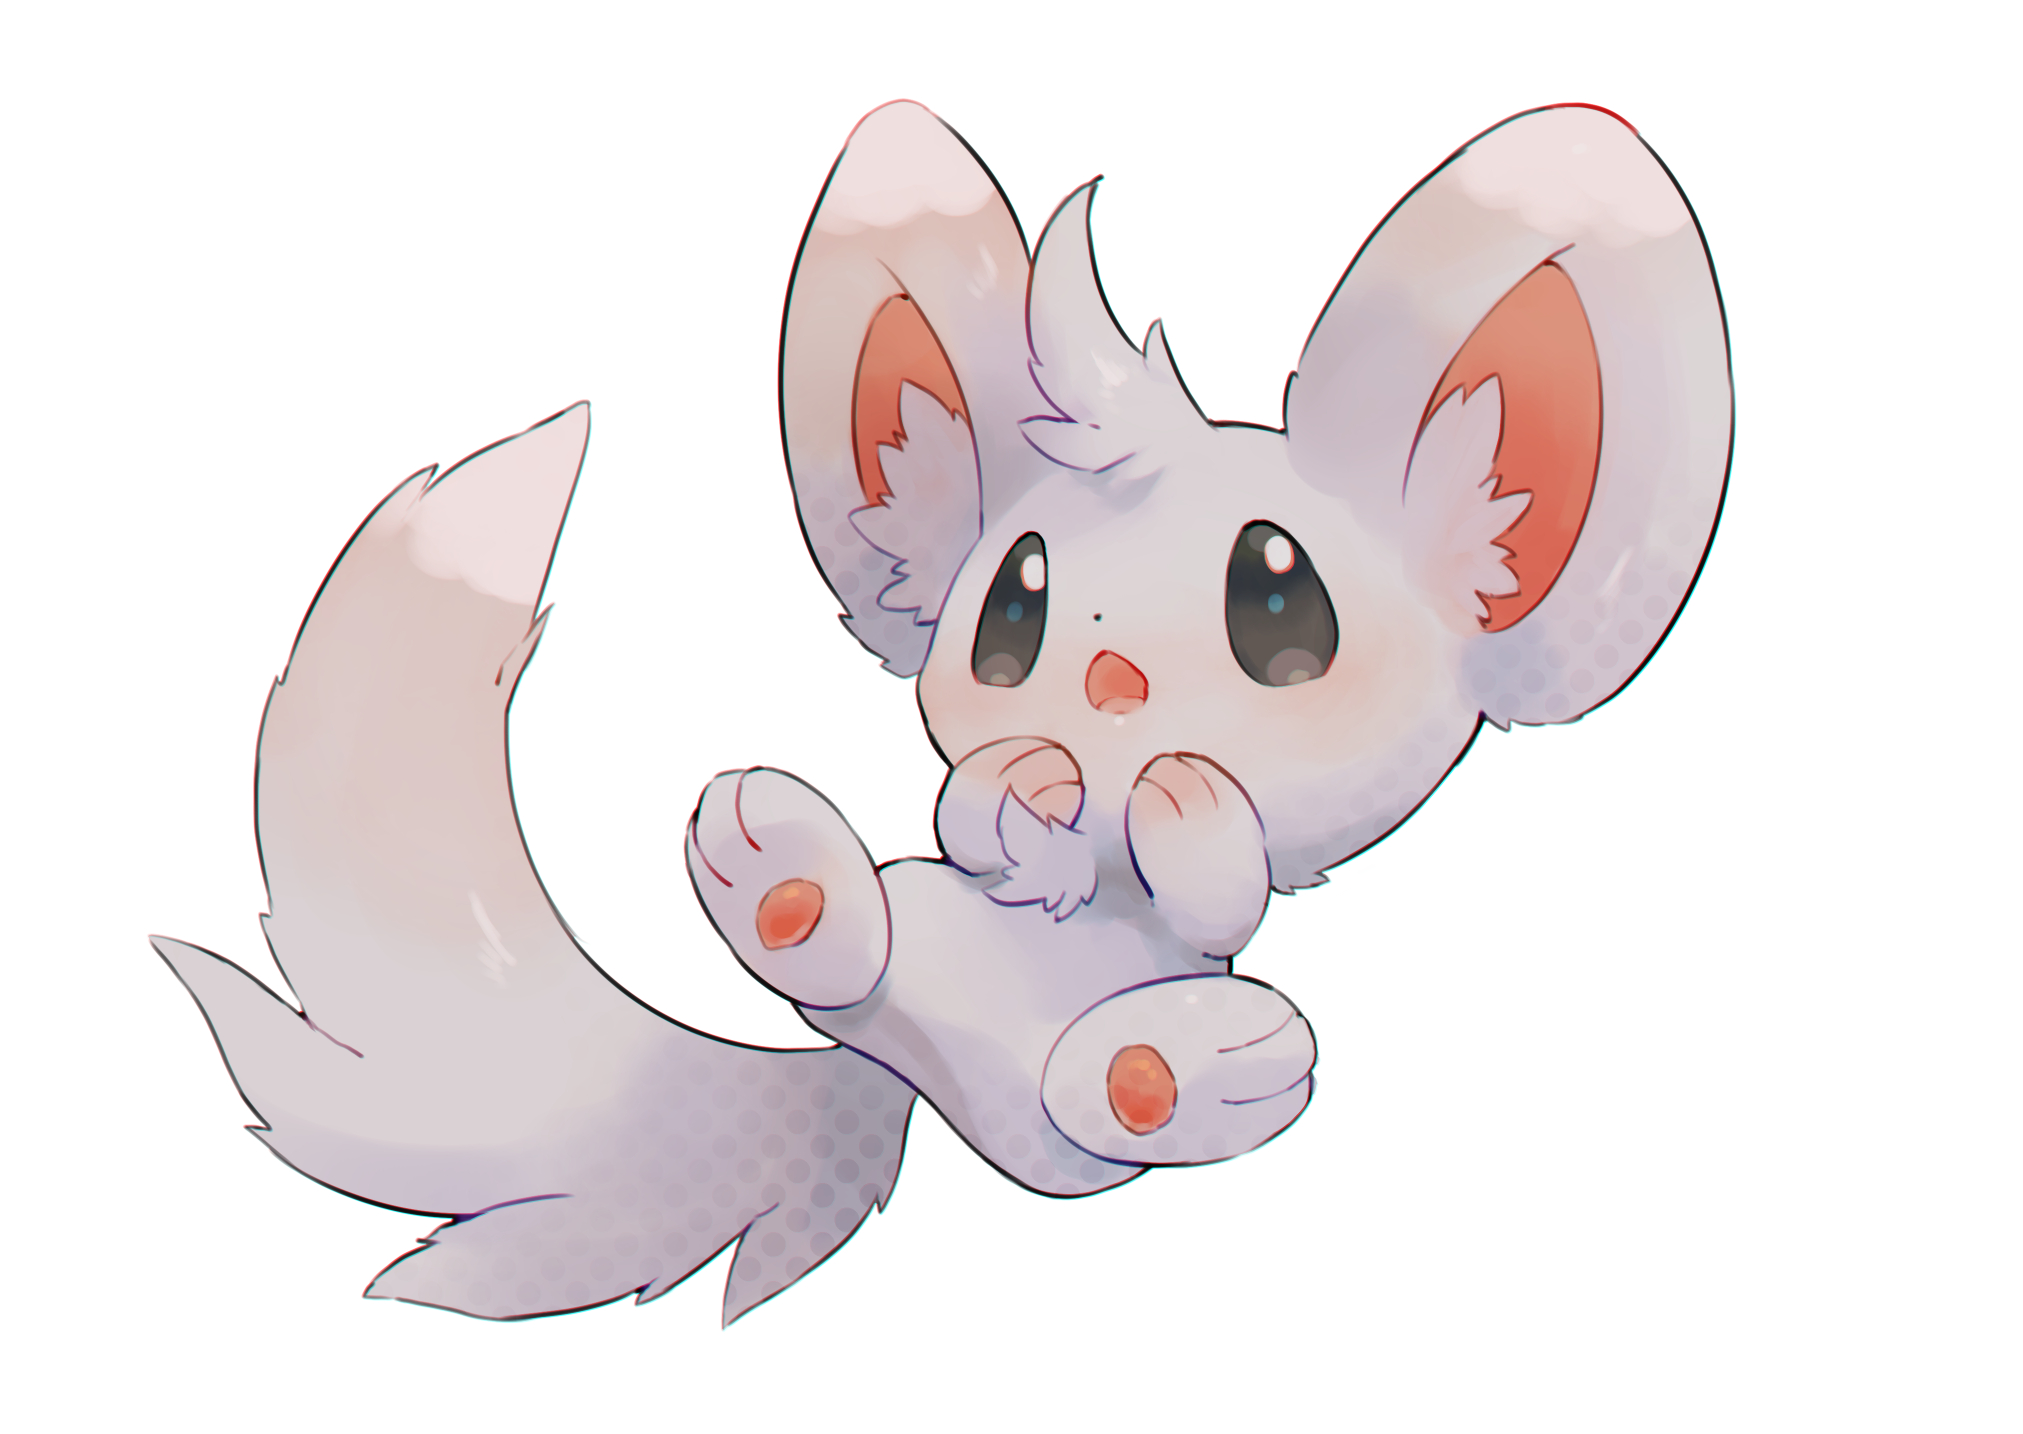 Minccino (Pokémon) HD Wallpapers and Backgrounds. 